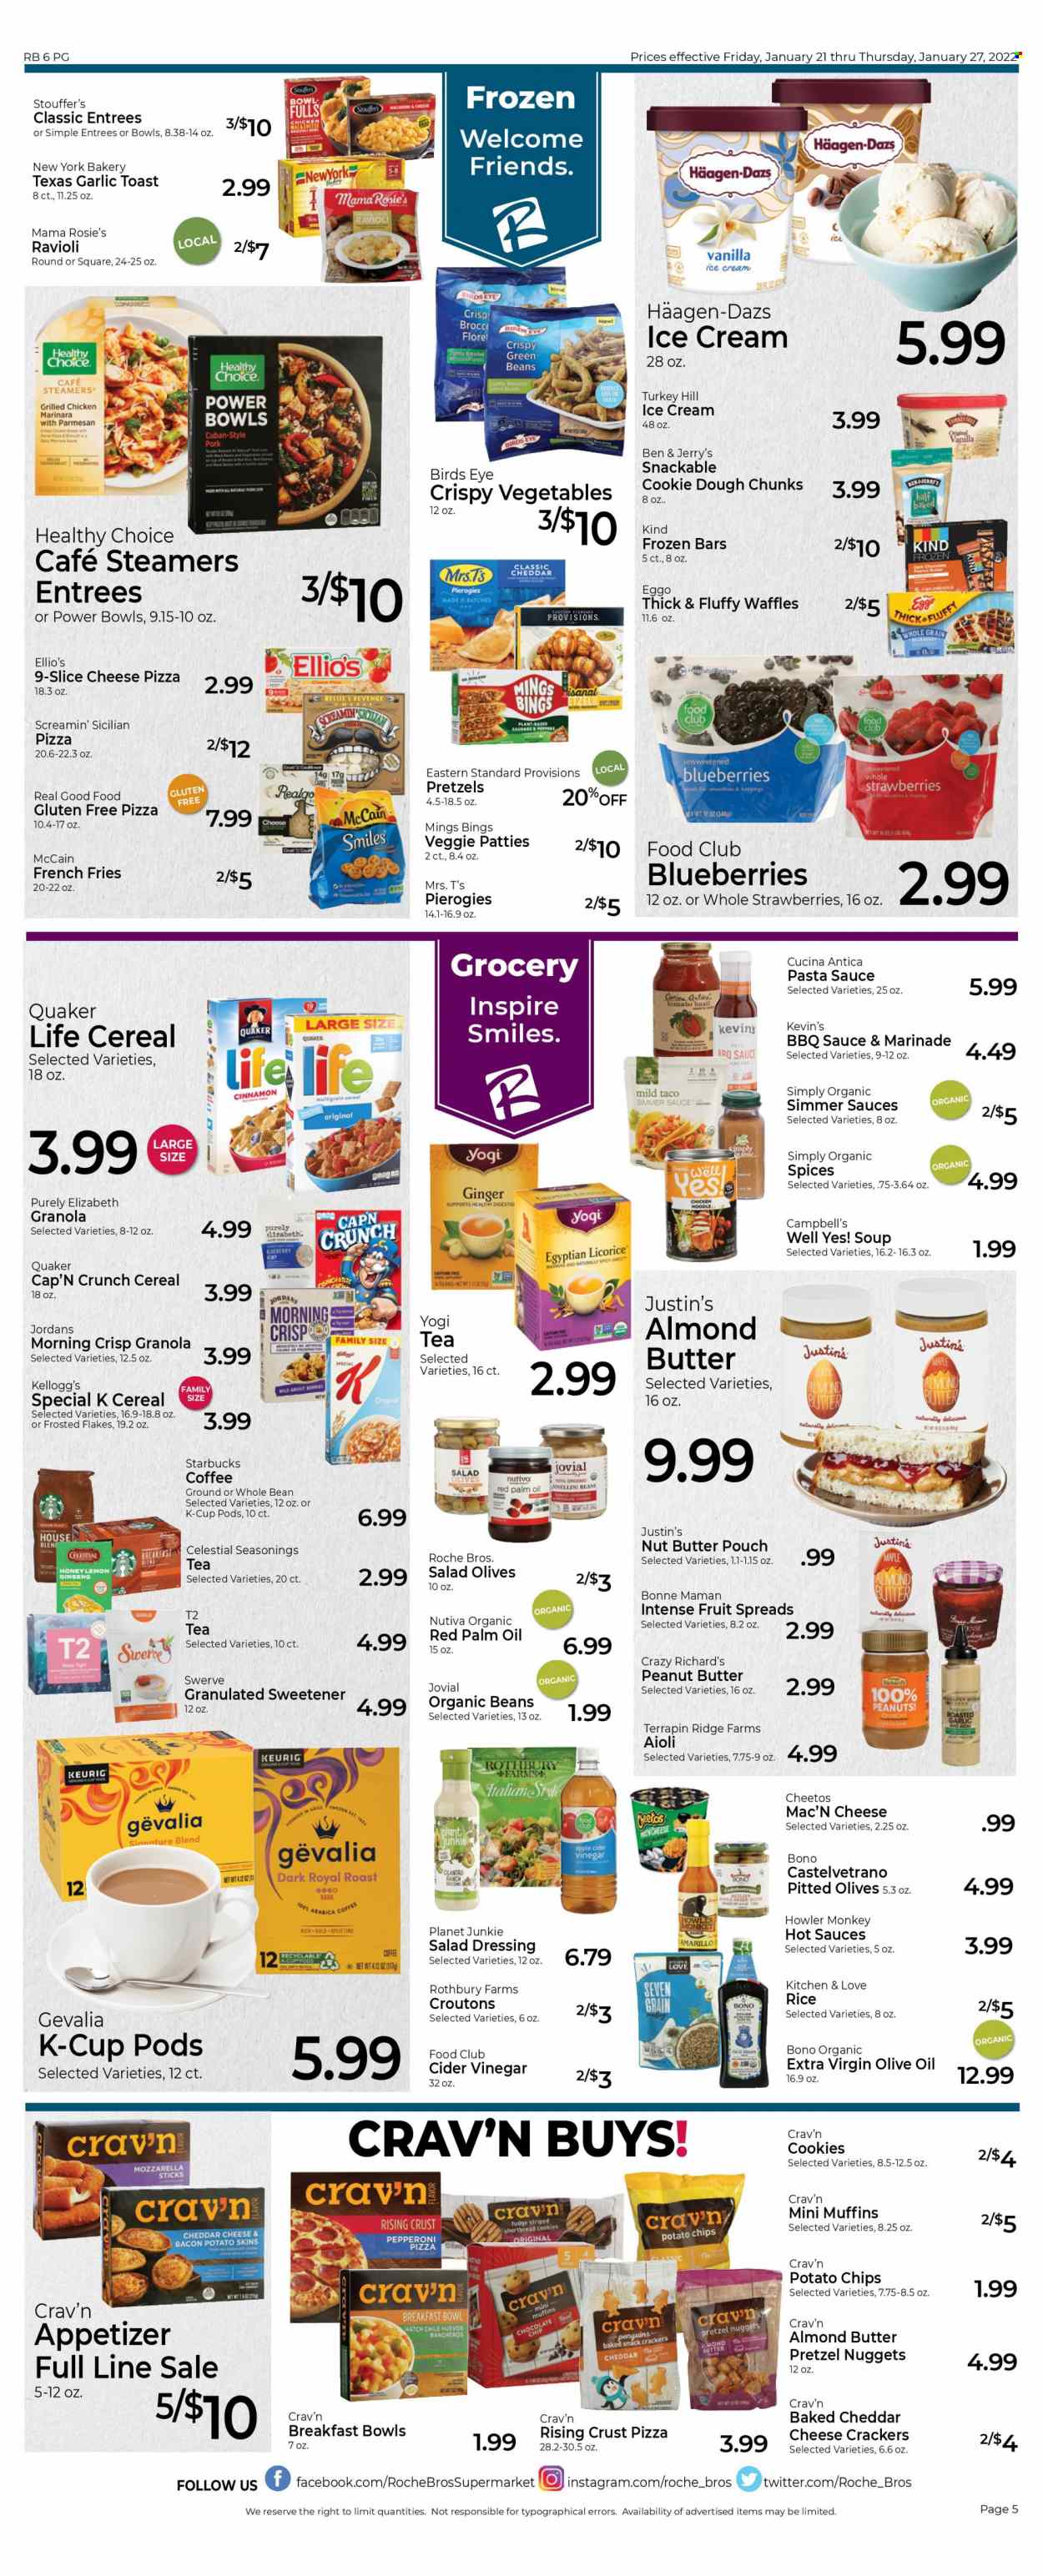 thumbnail - Roche Bros. Flyer - 01/21/2022 - 01/27/2022 - Sales products - pretzels, muffin, waffles, ginger, green beans, peppers, blueberries, strawberries, Campbell's, ravioli, pizza, pasta sauce, soup, nuggets, breakfast bowl, Bird's Eye, Quaker, Healthy Choice, bacon, pepperoni, sliced cheese, almond butter, ice cream, Häagen-Dazs, Ben & Jerry's, Stouffer's, McCain, potato fries, french fries, Screamin' Sicilian, cookie dough, cookies, fudge, crackers, Kellogg's, potato chips, Cheetos, croutons, sweetener, olives, cereals, granola, Cap'n Crunch, Frosted Flakes, esponja, cinnamon, BBQ sauce, salad dressing, dressing, marinade, apple cider vinegar, extra virgin olive oil, palm oil, olive oil, oil, honey, peanut butter, nut butter, peanuts, tea bags, coffee, Starbucks, coffee capsules, K-Cups, Gevalia, Keurig, ginseng. Page 5.